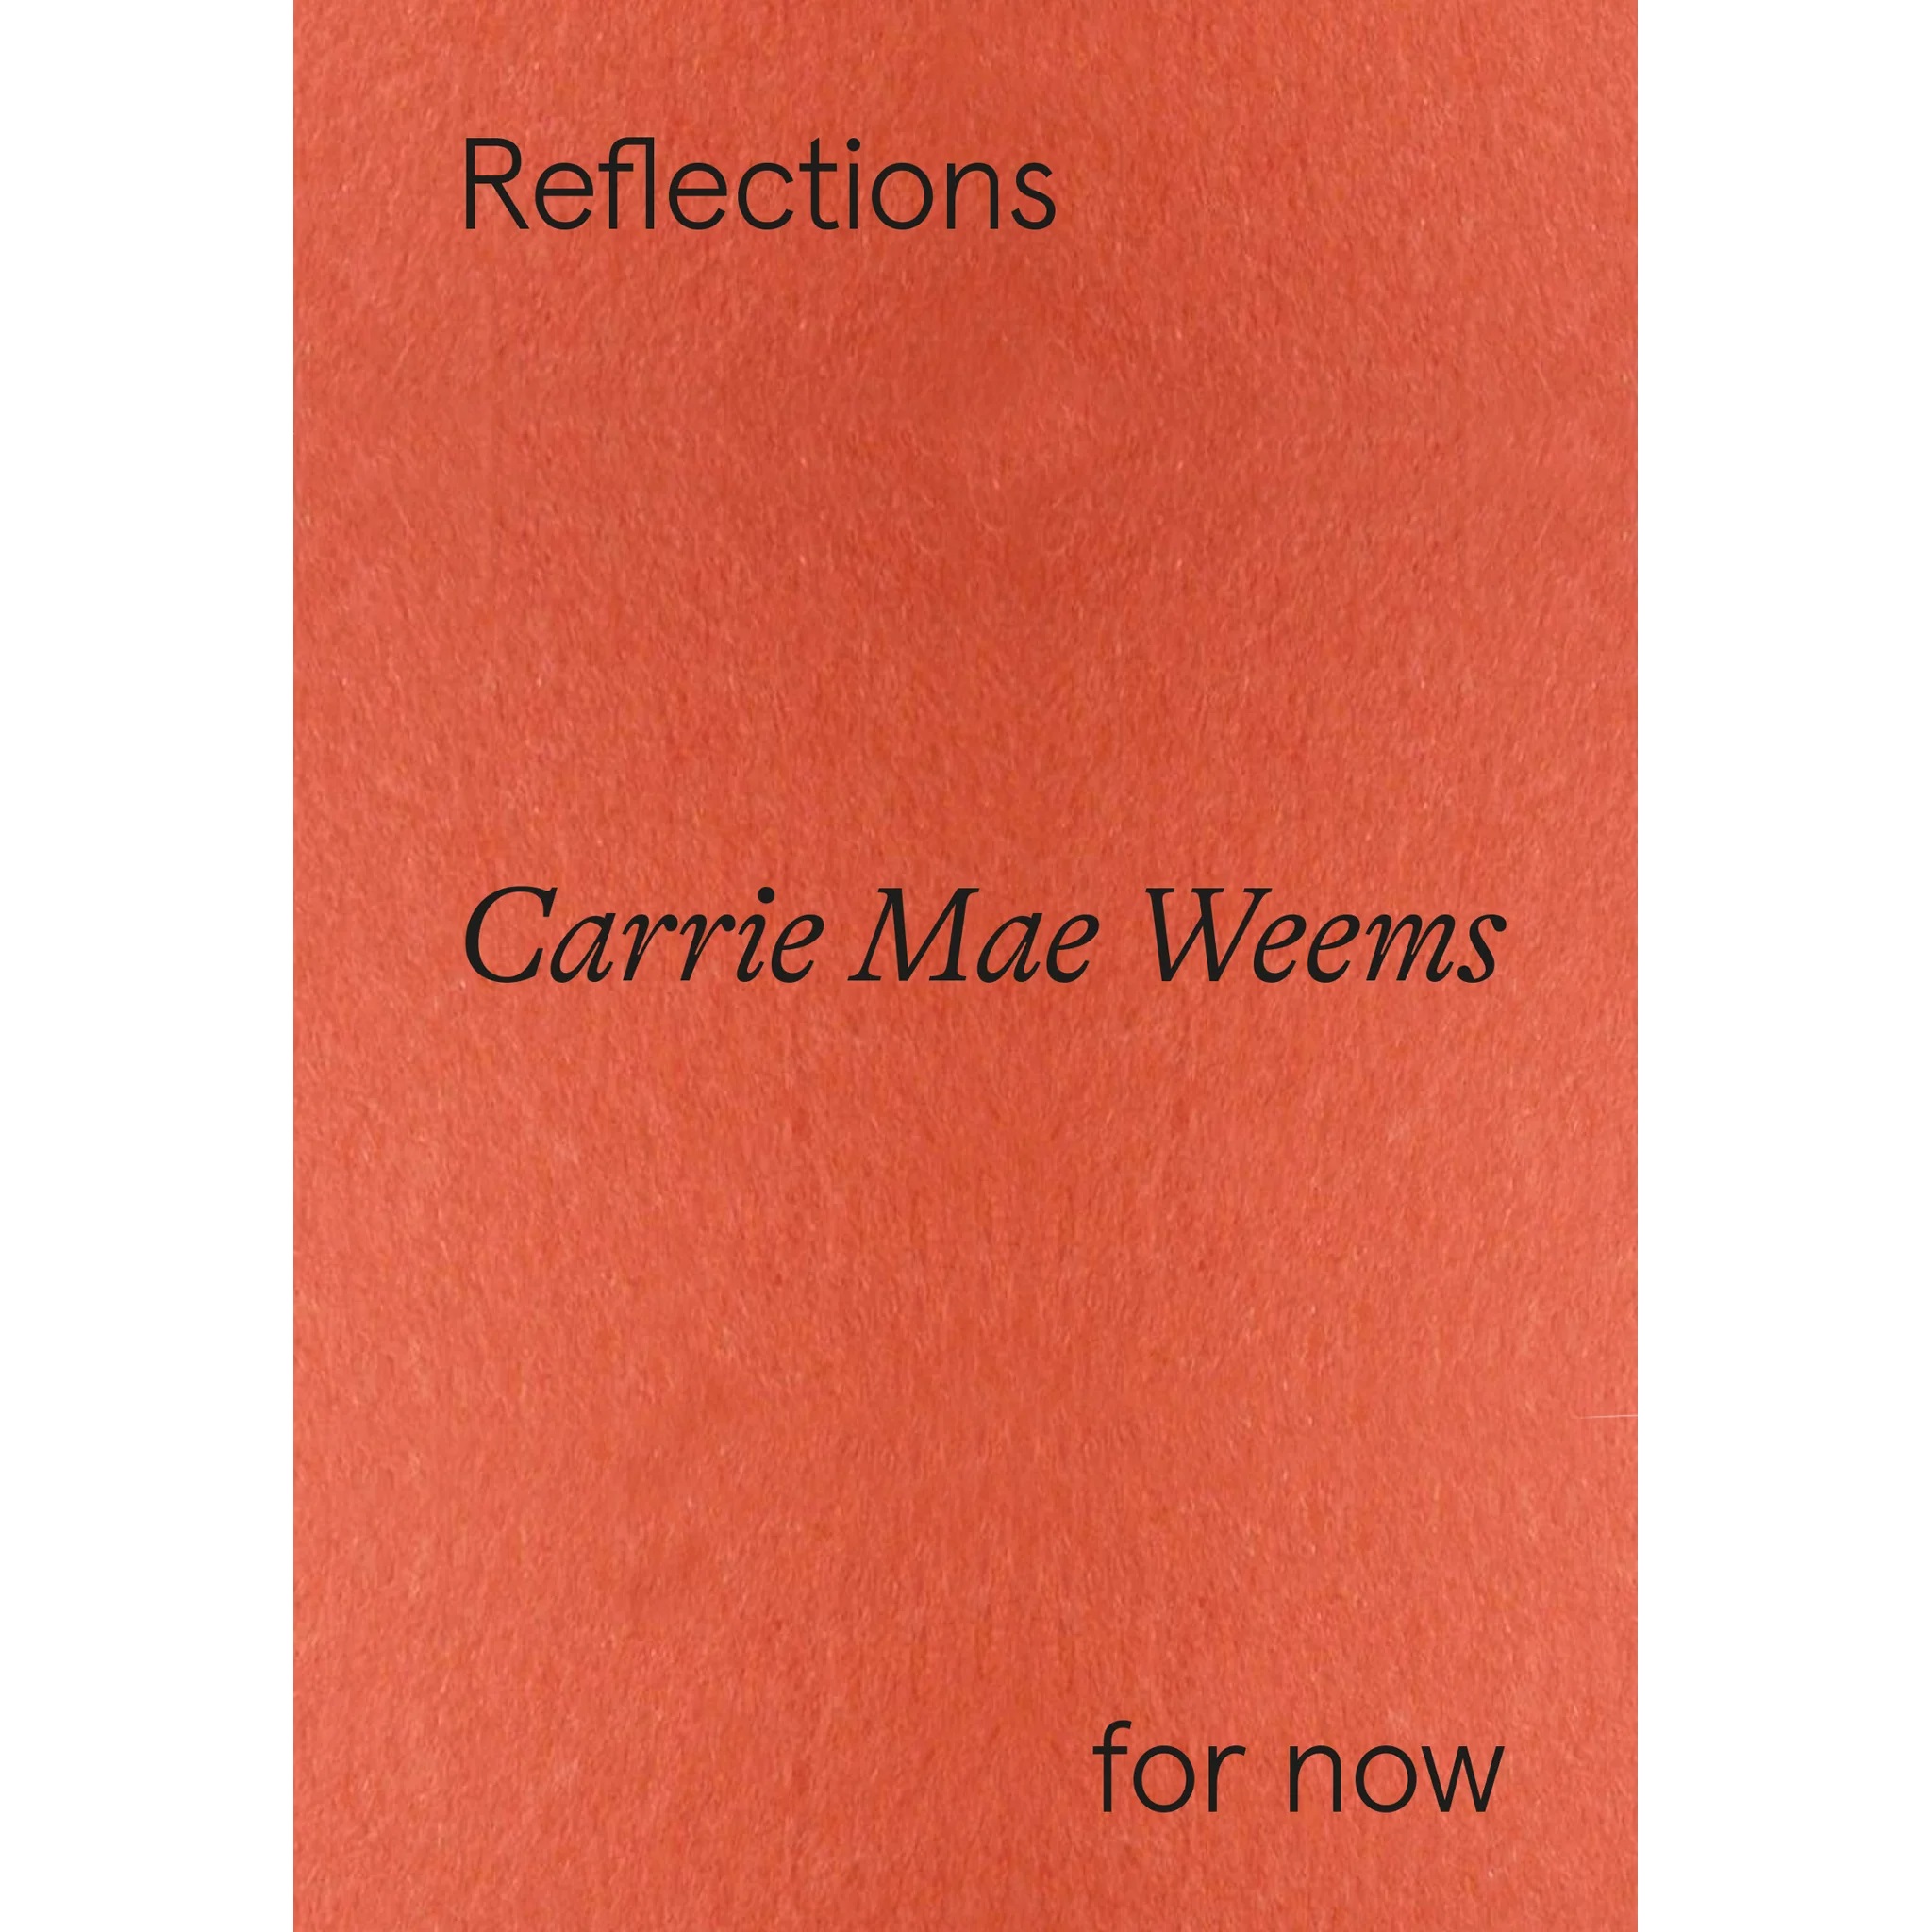 CARRIE MAE WEEMS - REFLECTIONS FOR NOW, E, Kunstmuseum Basel, Hatje Cantz, 2023